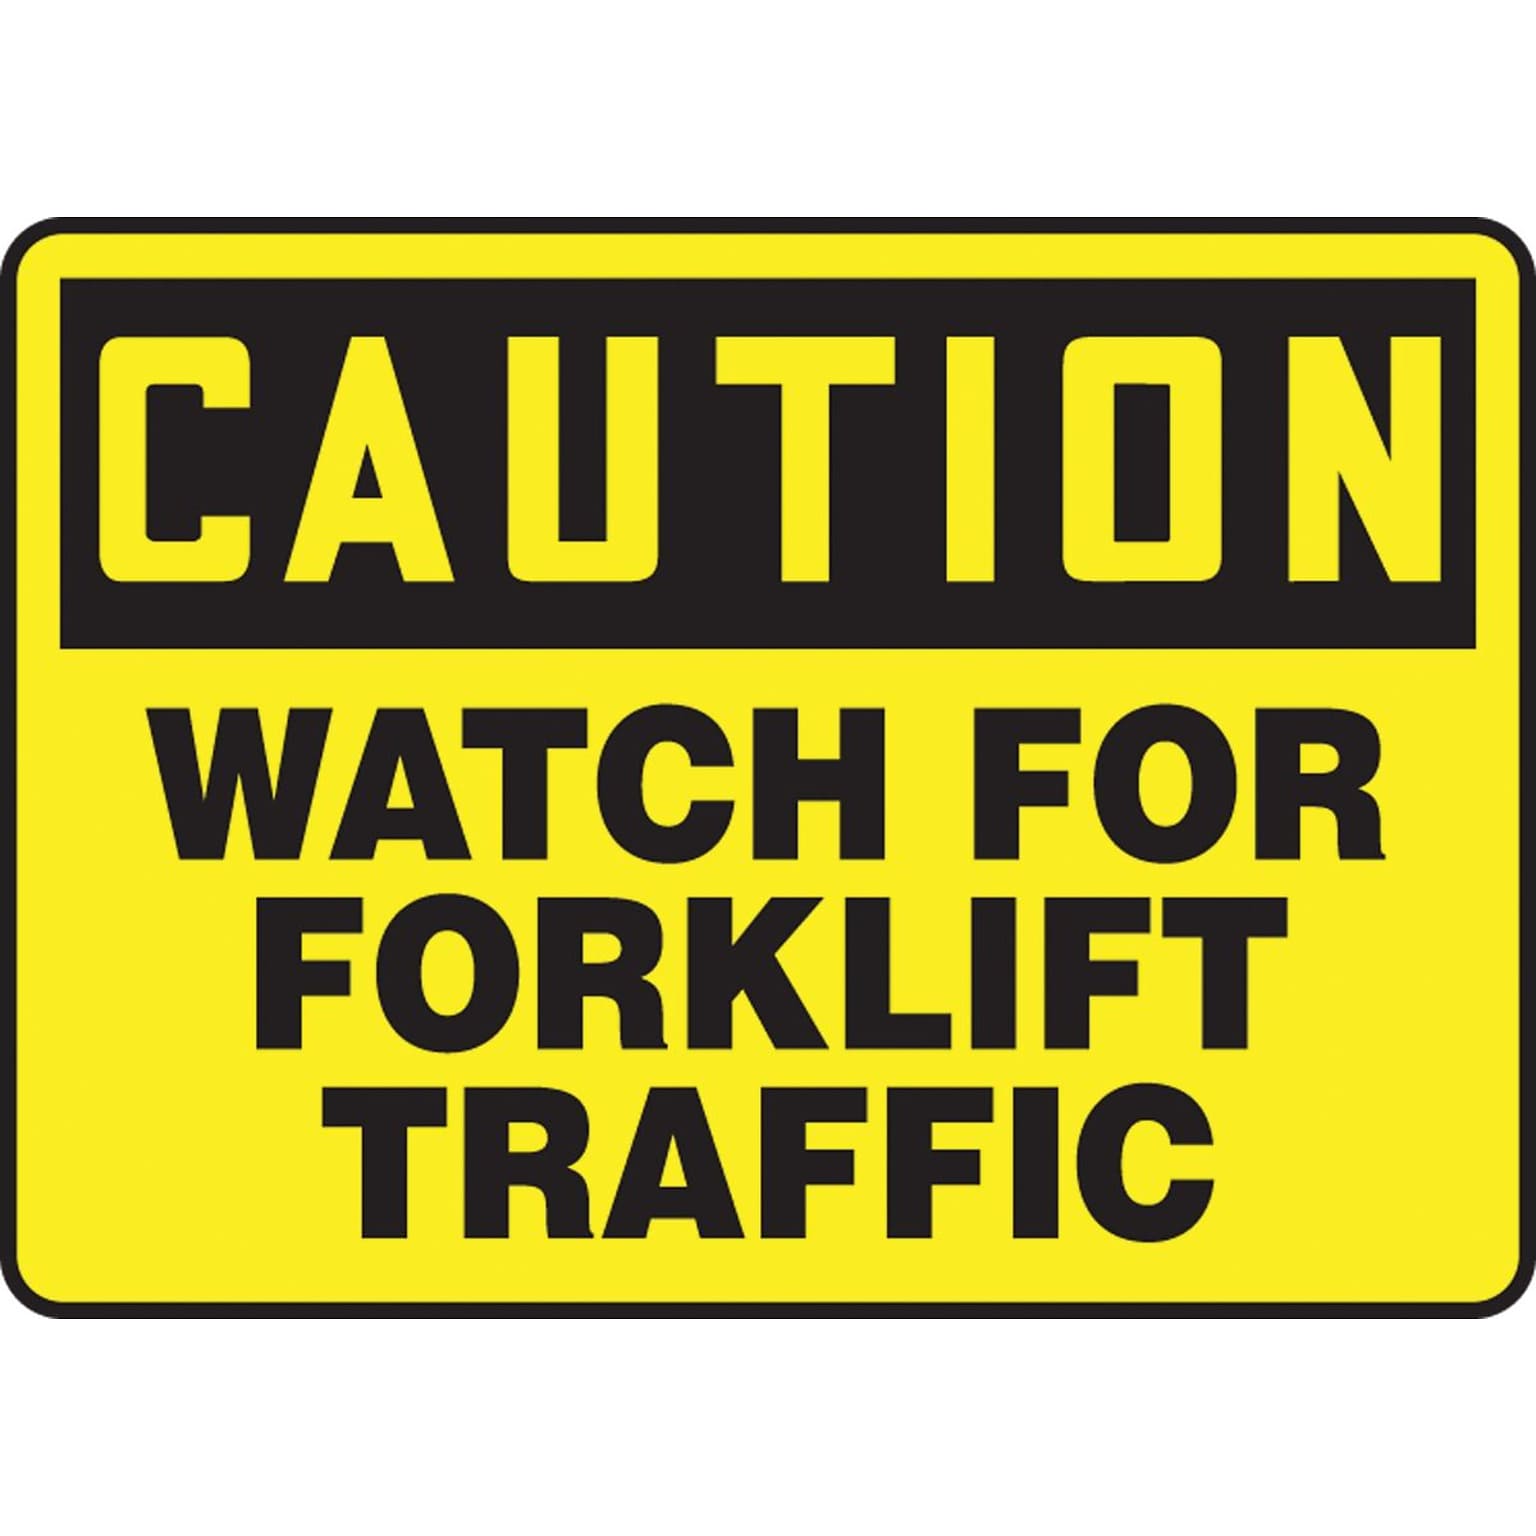 Accuform 7 x 10 Plastic Safety Sign CAUTION WATCH FOR FORKLIFT TRAFFIC, Black On Yellow (MVHR631VP)